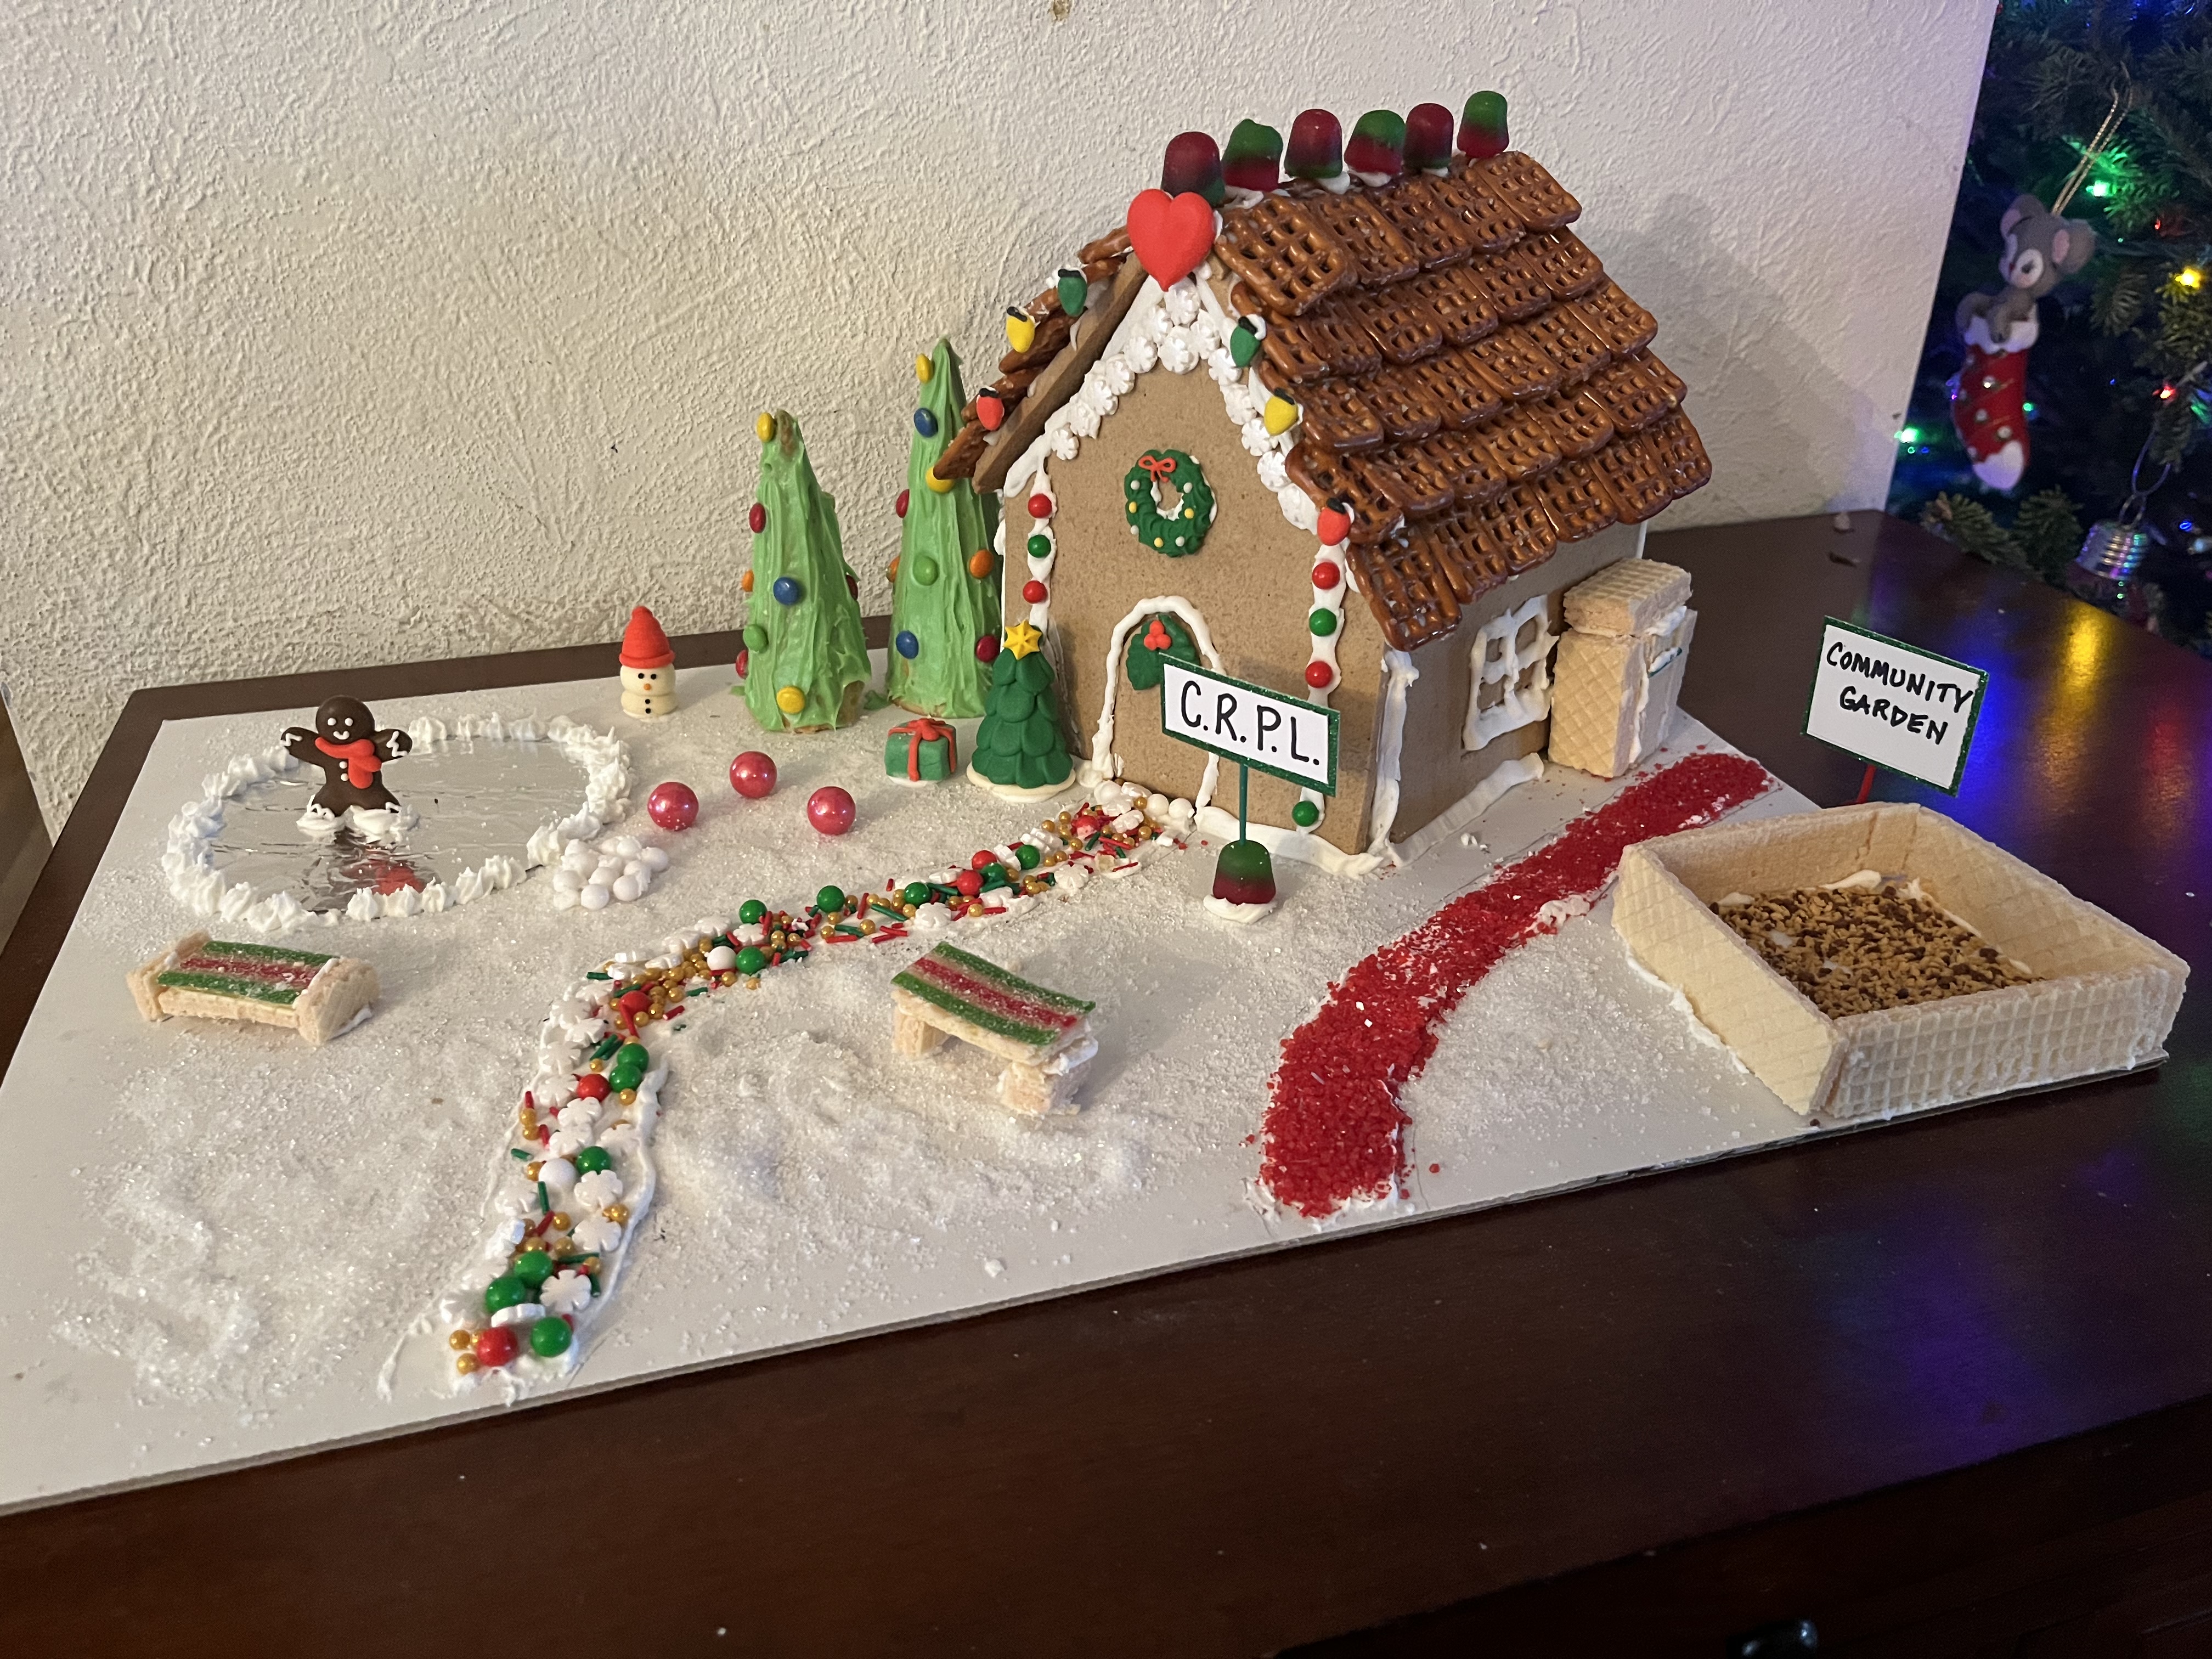 A gingerbread house has a candy path in front, a sign that says "CRPL," a pond, and a community garden.